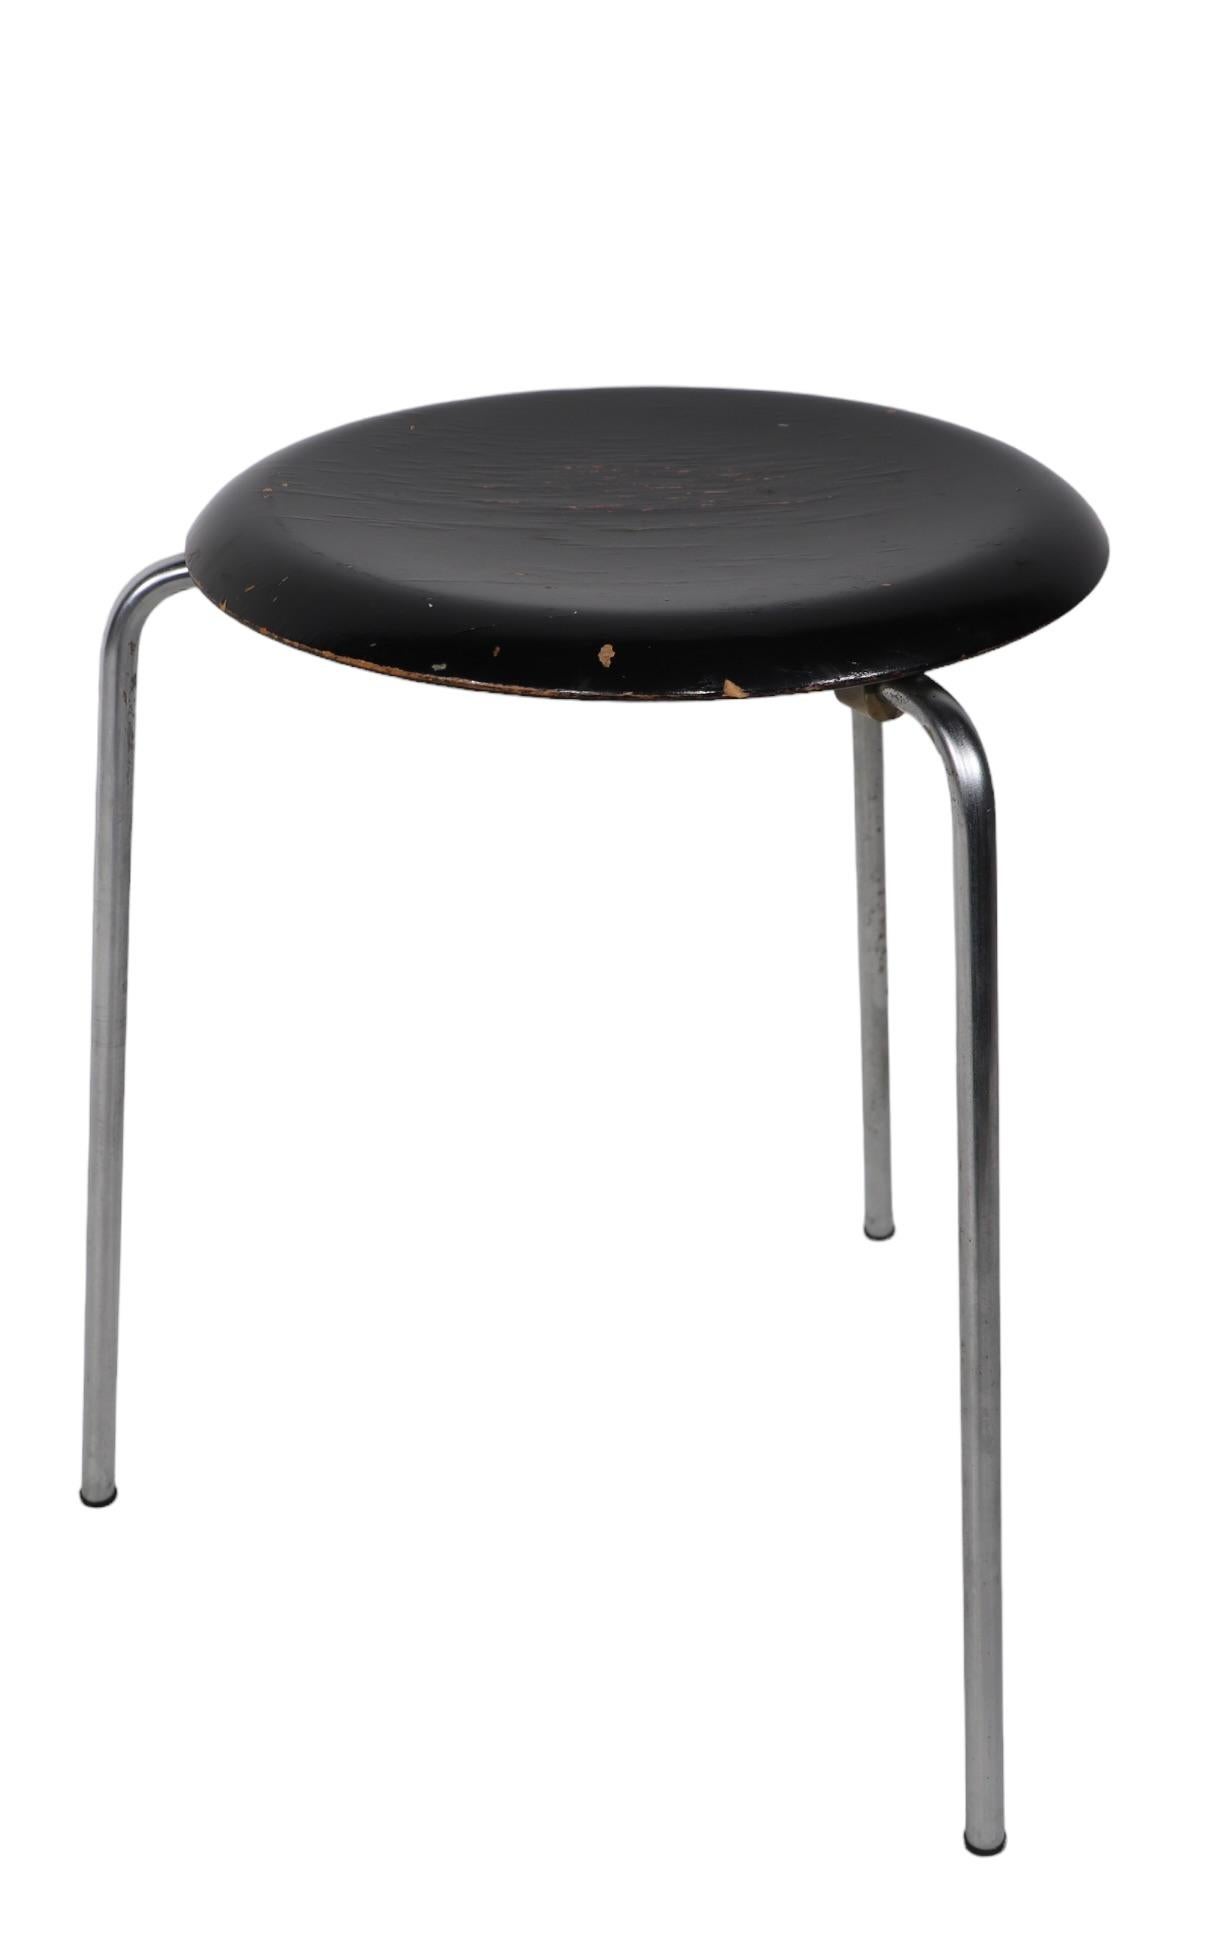 Classic Arne Jacobson Dot Stool, Made in Denmark by Fritz Hansen. This is a vintage three leg example, prior to the revised four leg version  released in  the  1970's. This example is structurally sound and sturdy, the chrome is bright and clean,